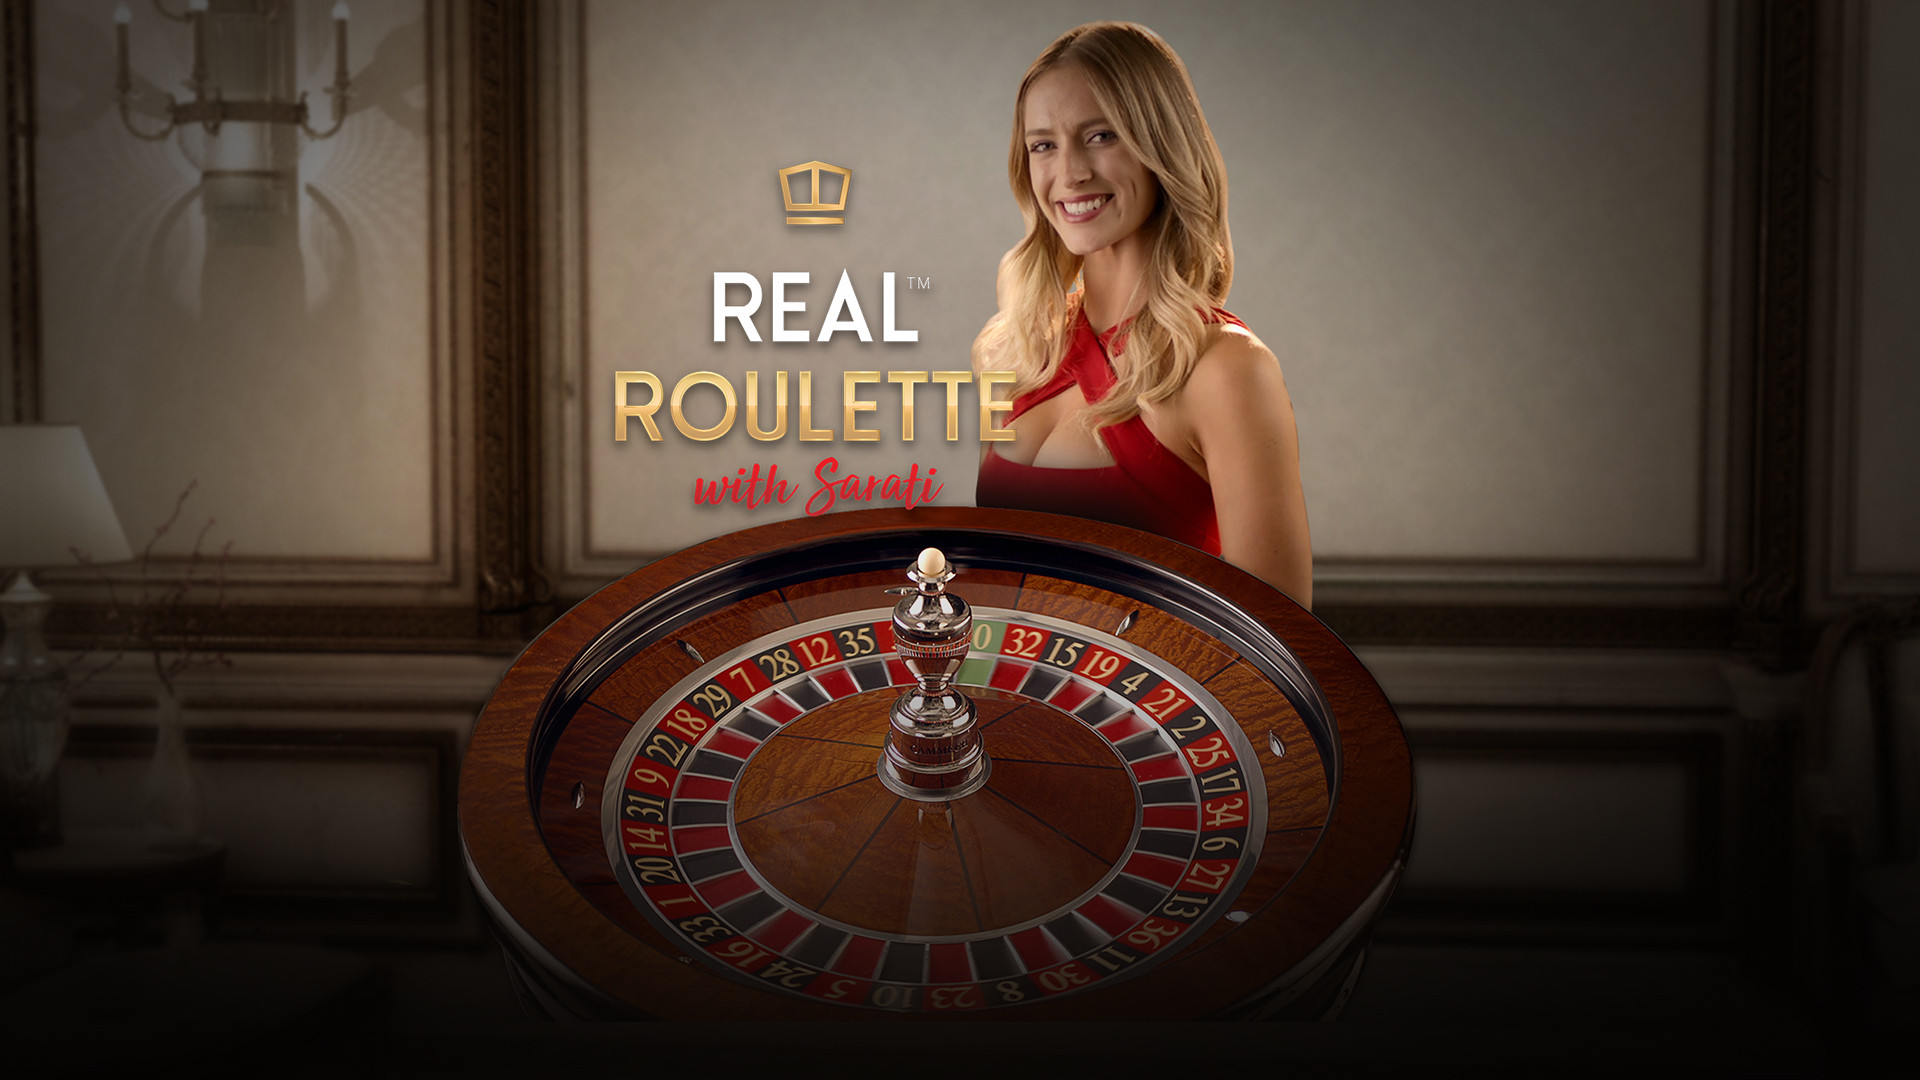 Real Roulette with Sarati